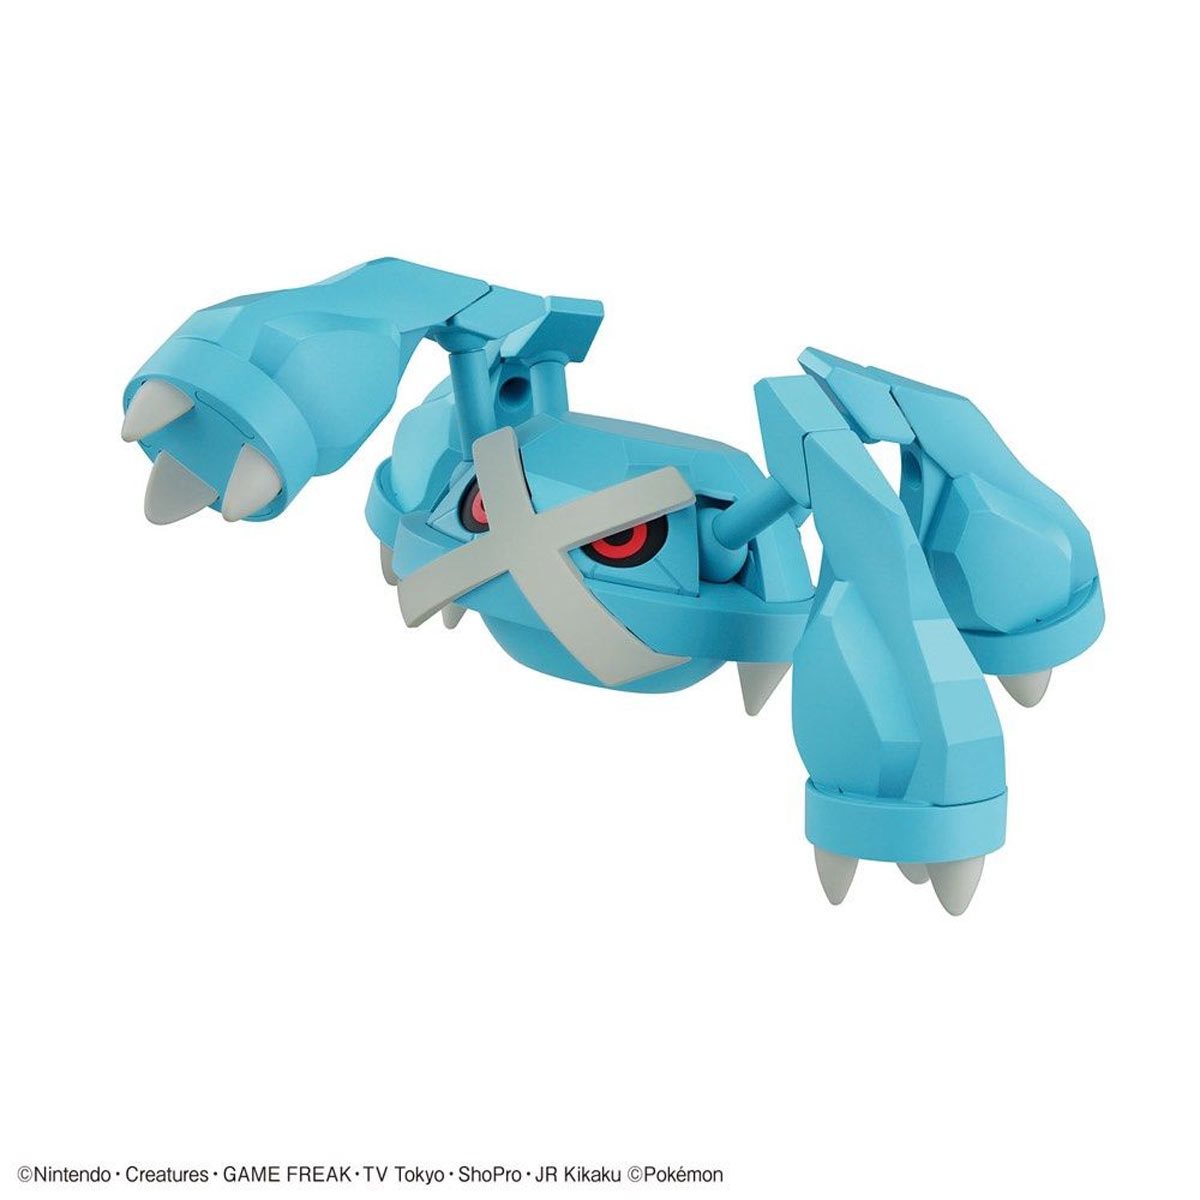 Pokemon Squirtle Quick Model Kit - Entertainment Earth